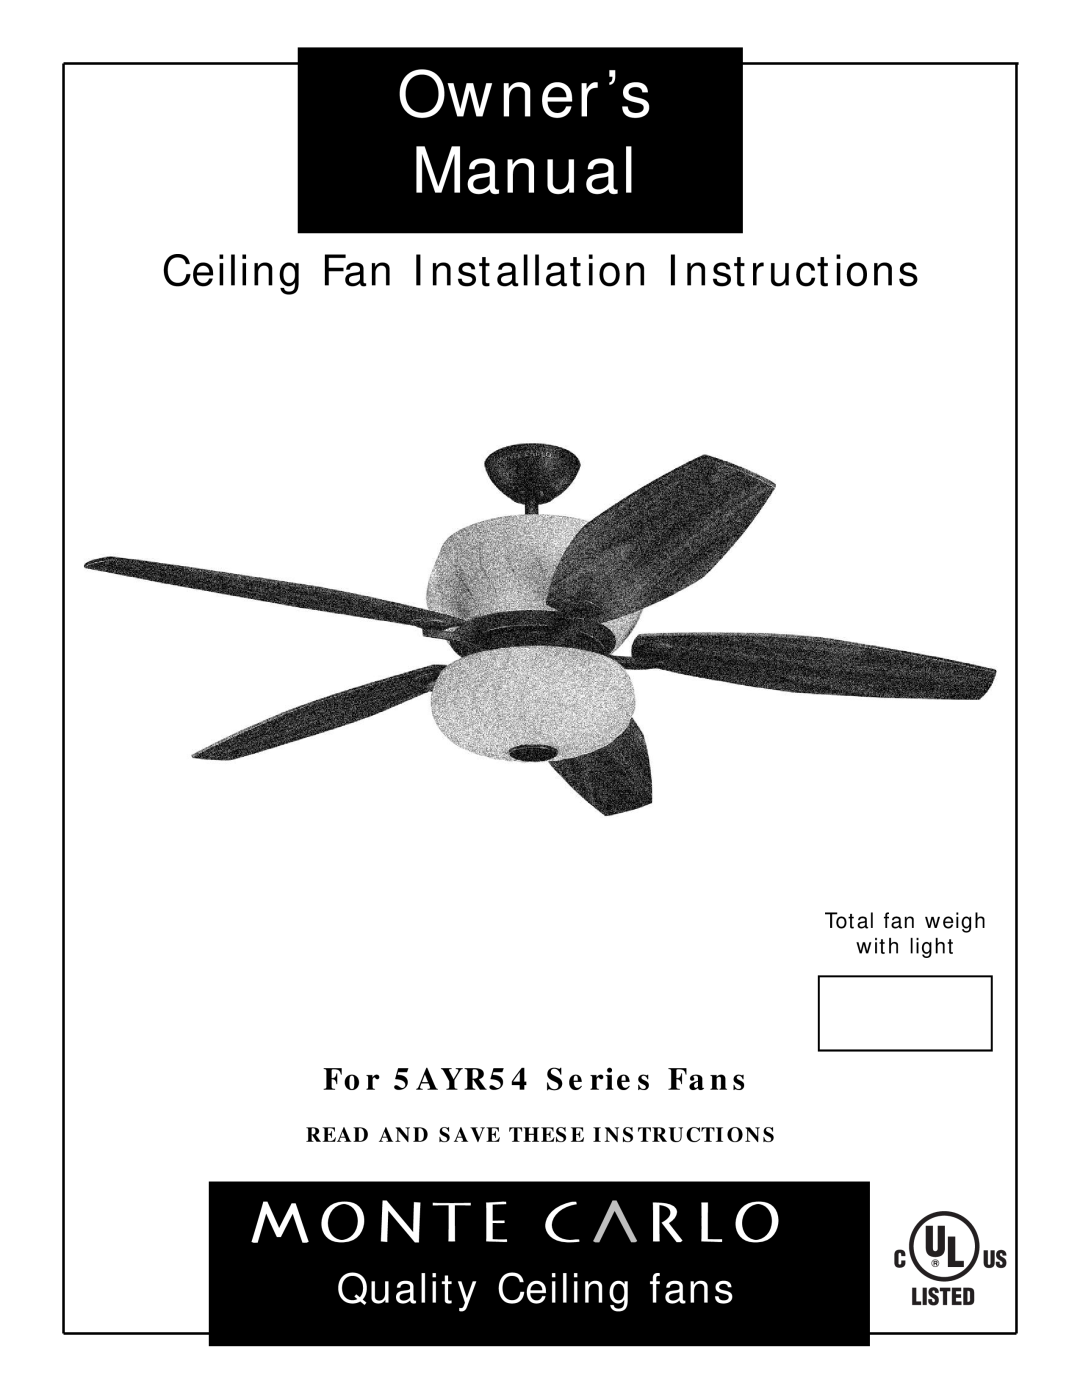 Monte Carlo Fan Company owner manual For 5AYR54 Series Fans, Ceiling Fan Installation Instructions 